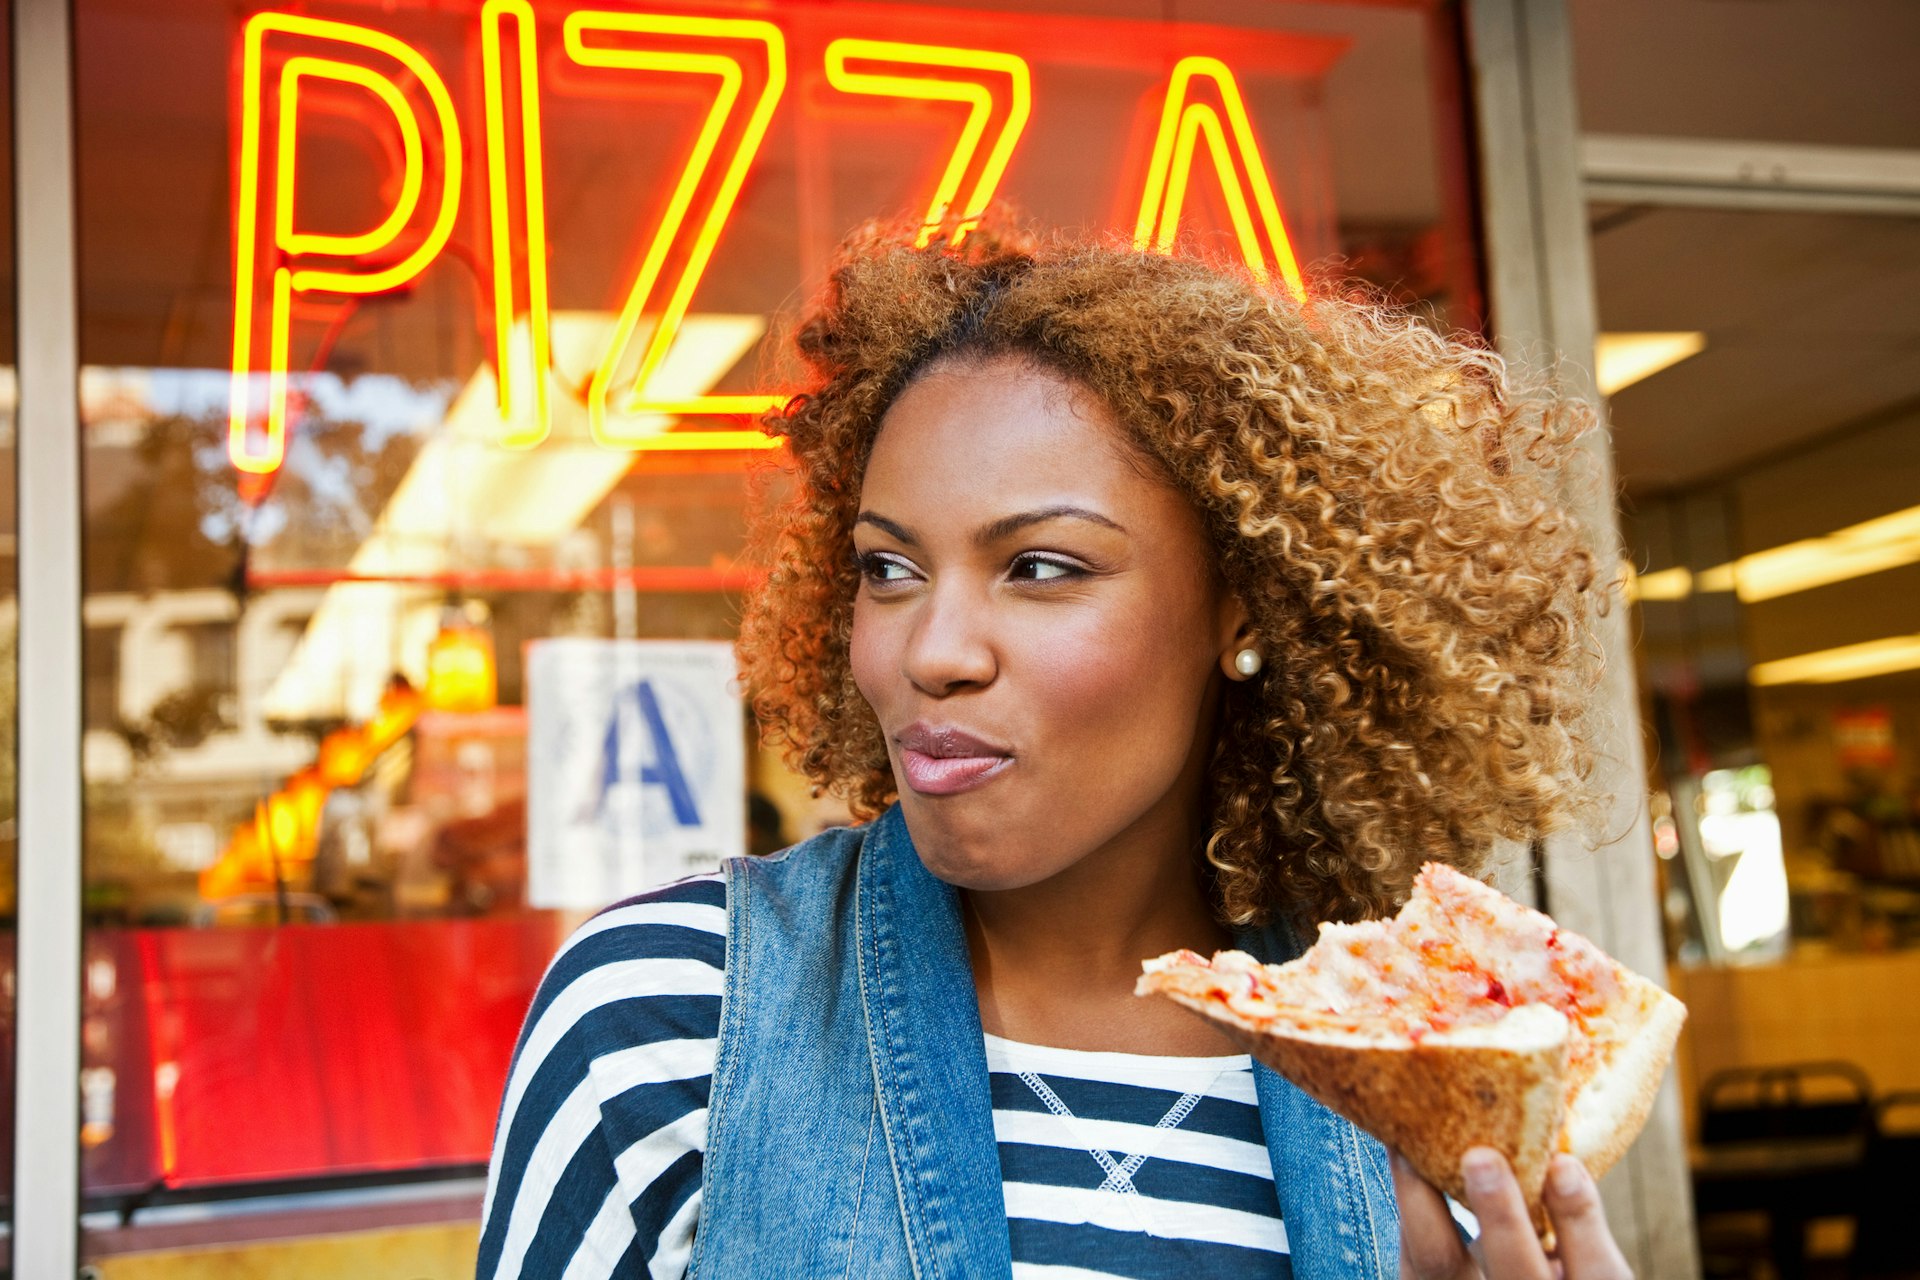 A close up of a black woman eating a slice of pizza outside a pizza restaurant in NYC 